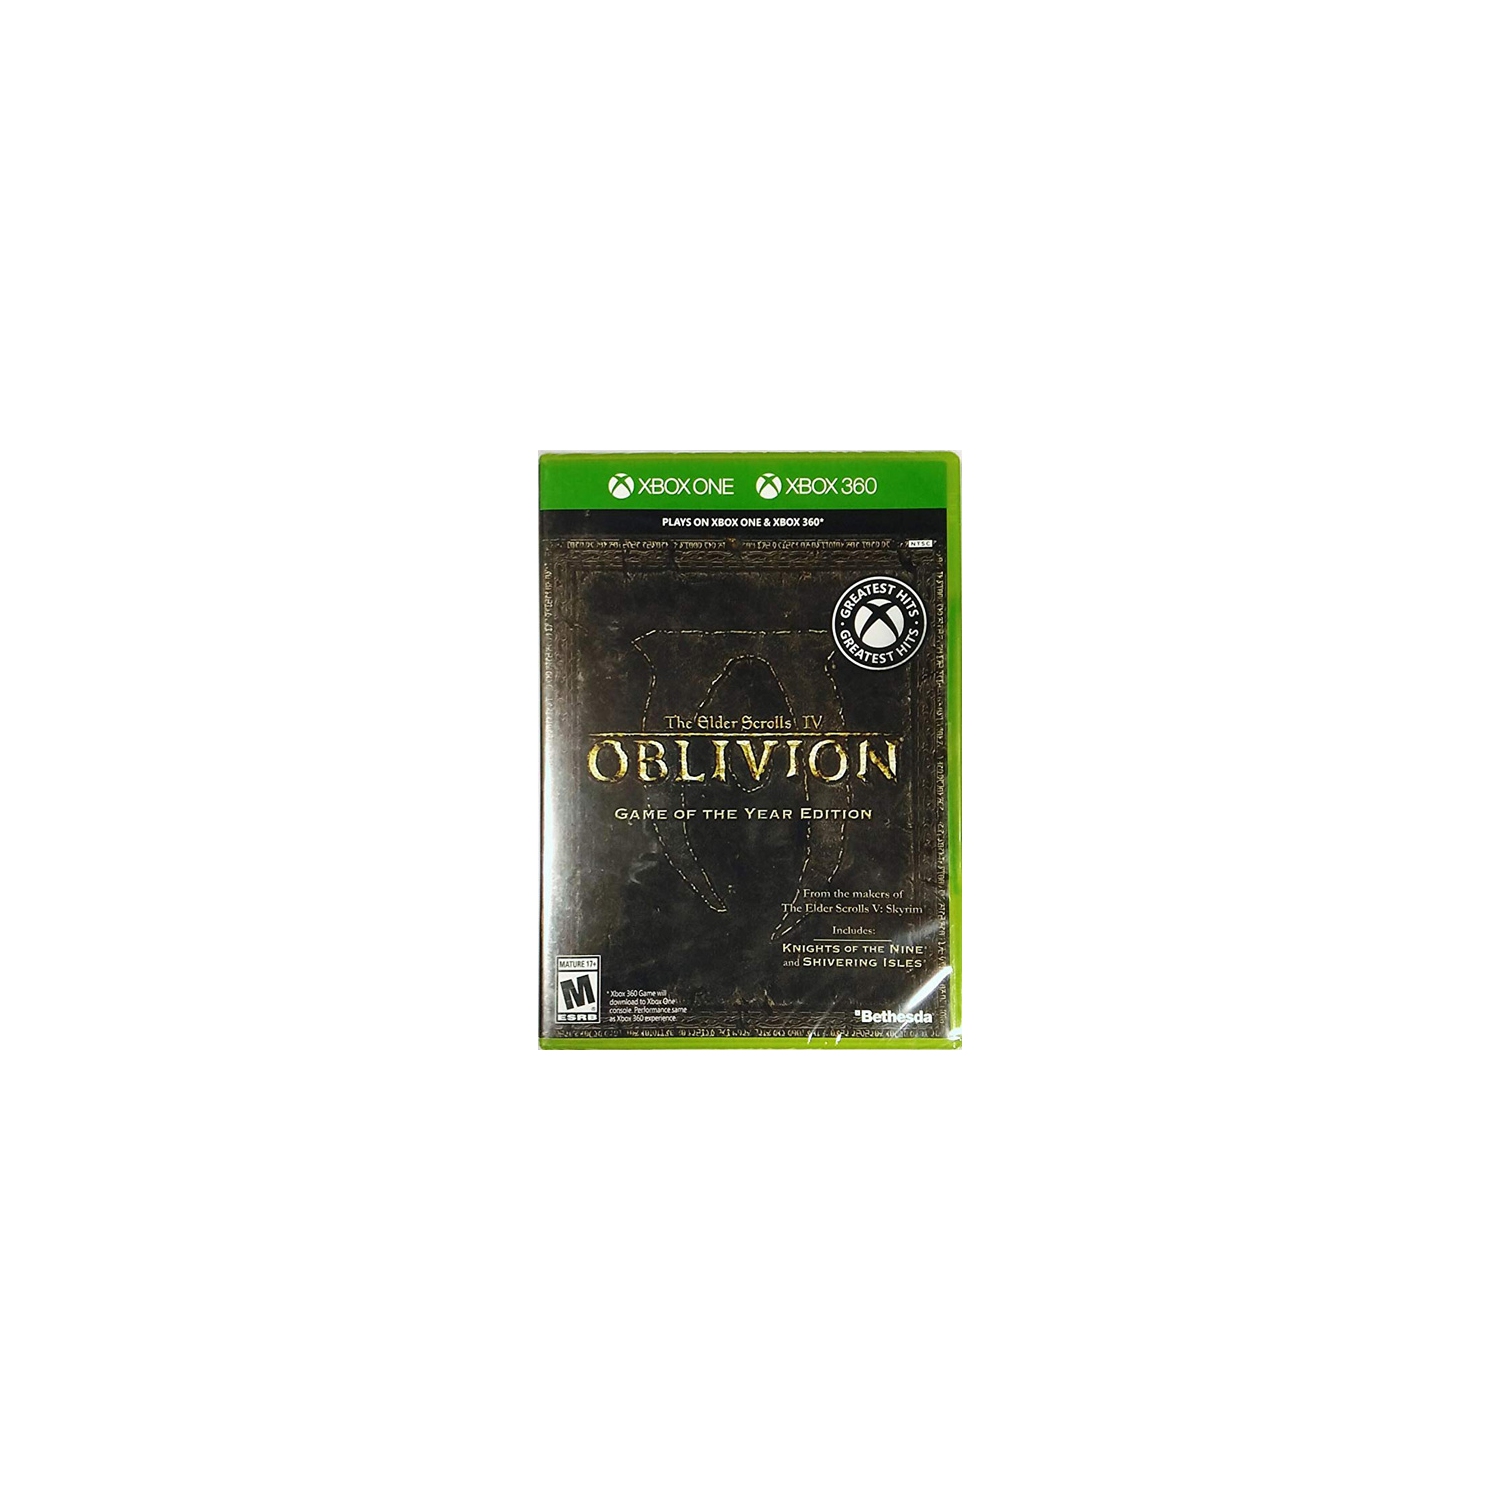 The Elder Scrolls Iv 4: Oblivion Game Of The Year Edition (Xbox 360)